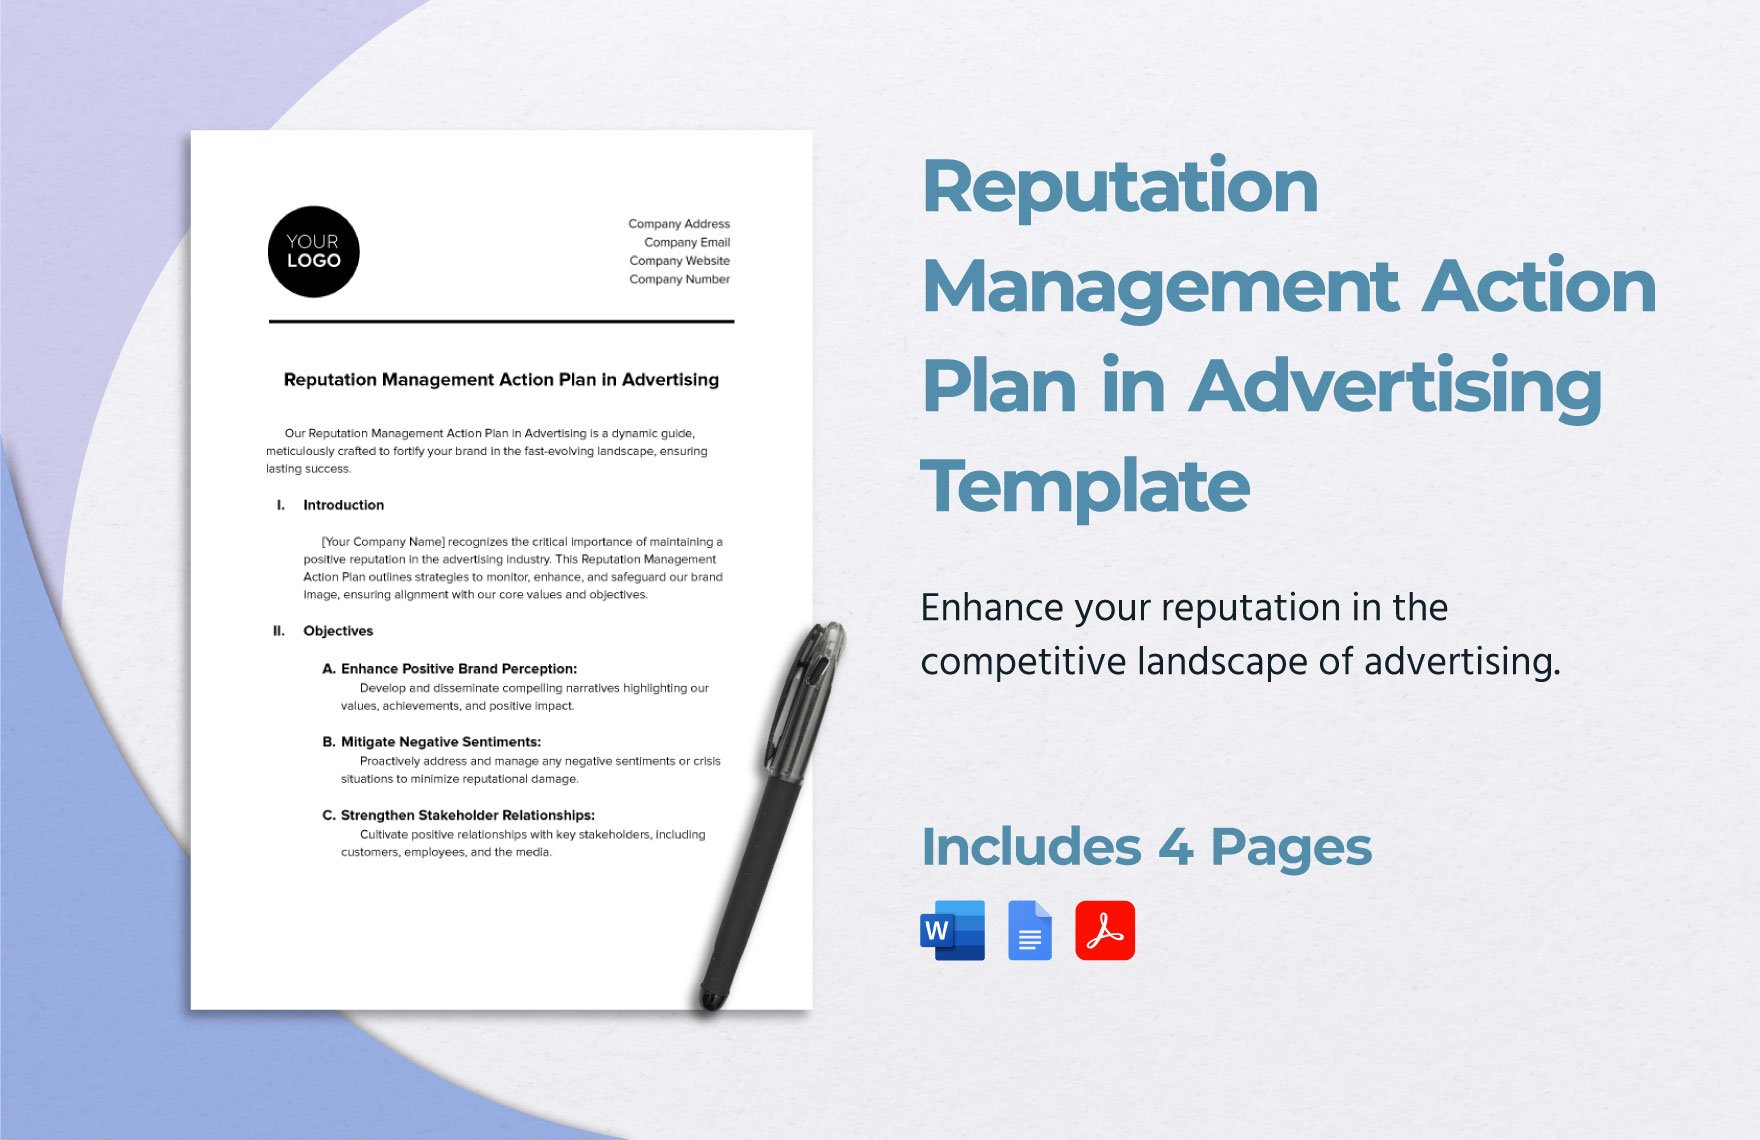 Reputation Management Action Plan in Advertising Template